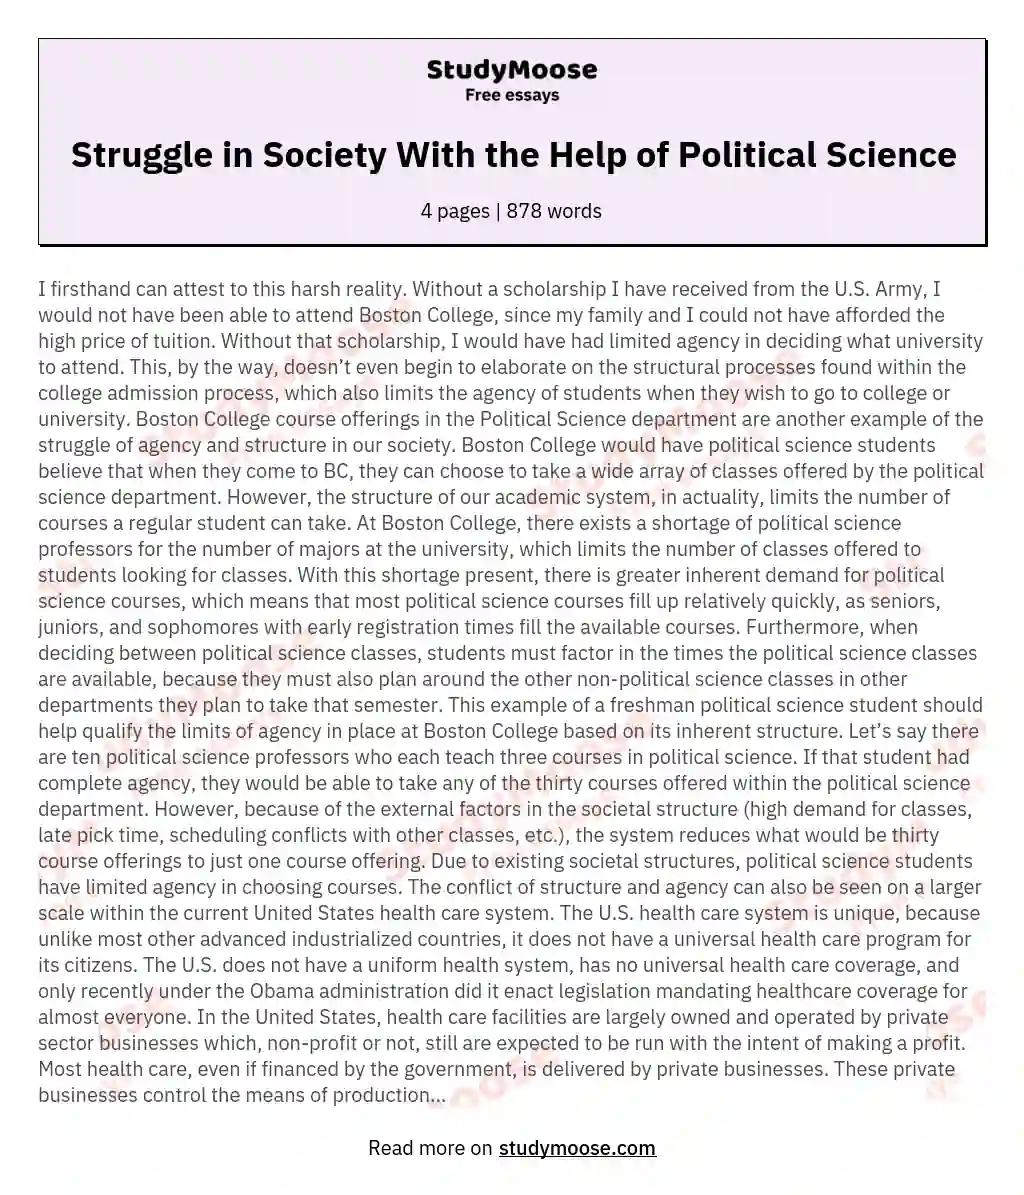 Struggle in Society With the Help of Political Science essay